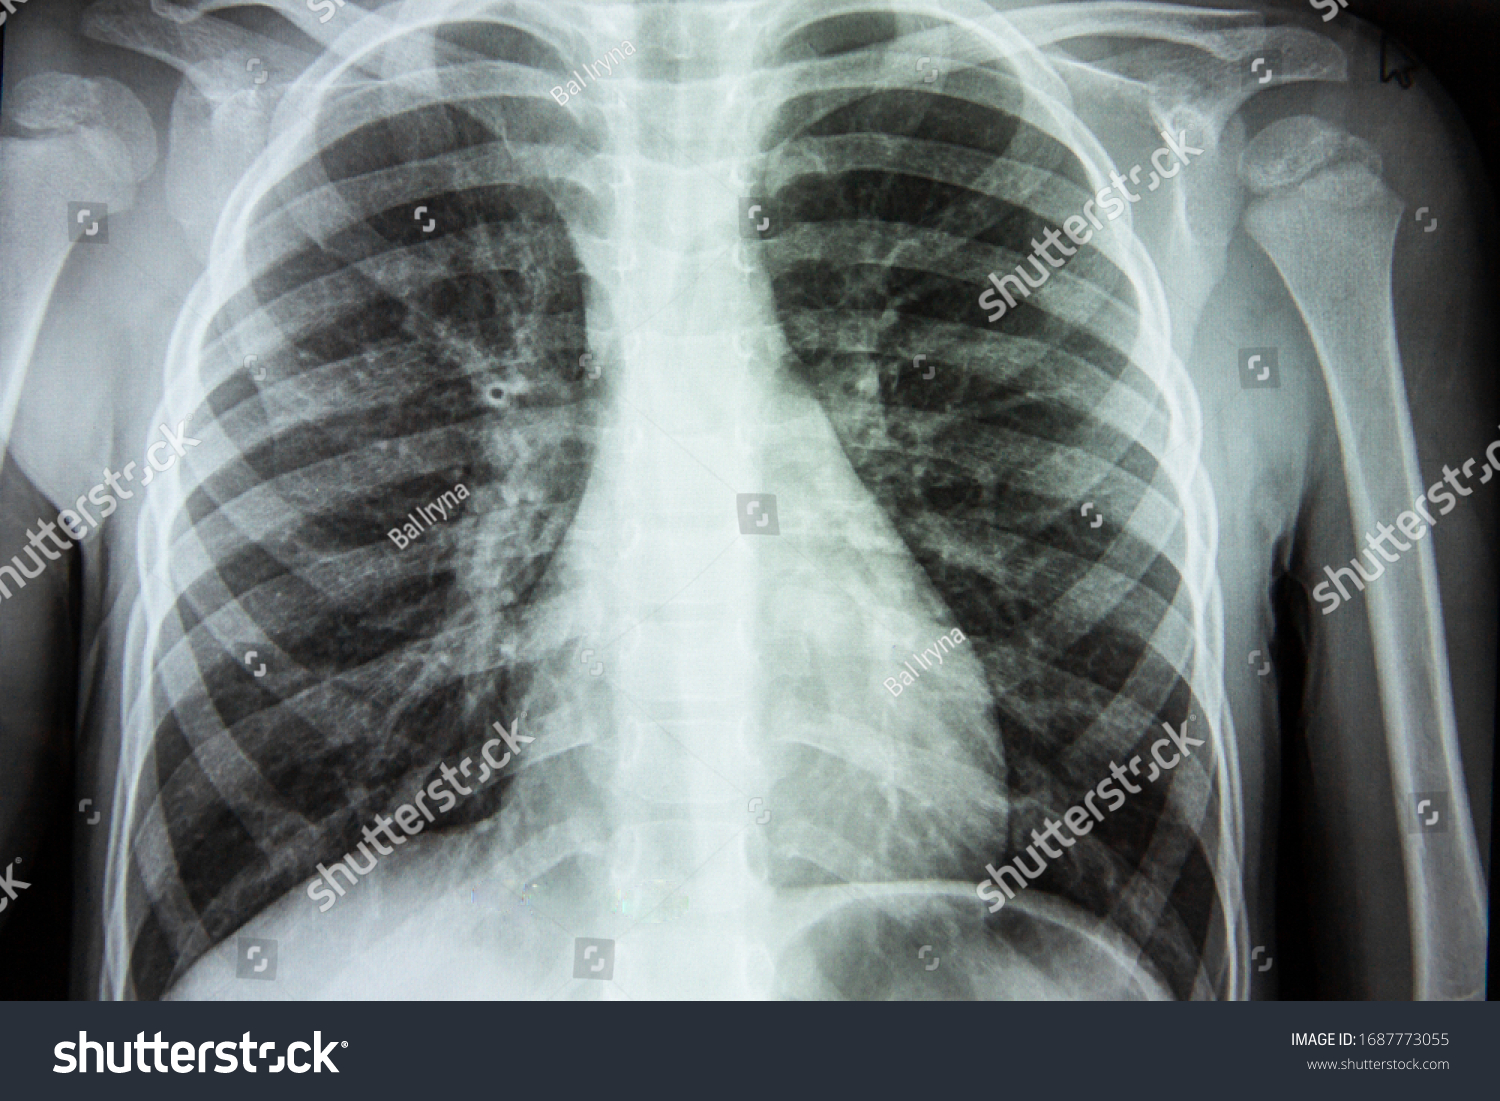 X-ray of a person s lungs with a disease. Coronavirus or cancer infected lungs. Virus screening #1687773055